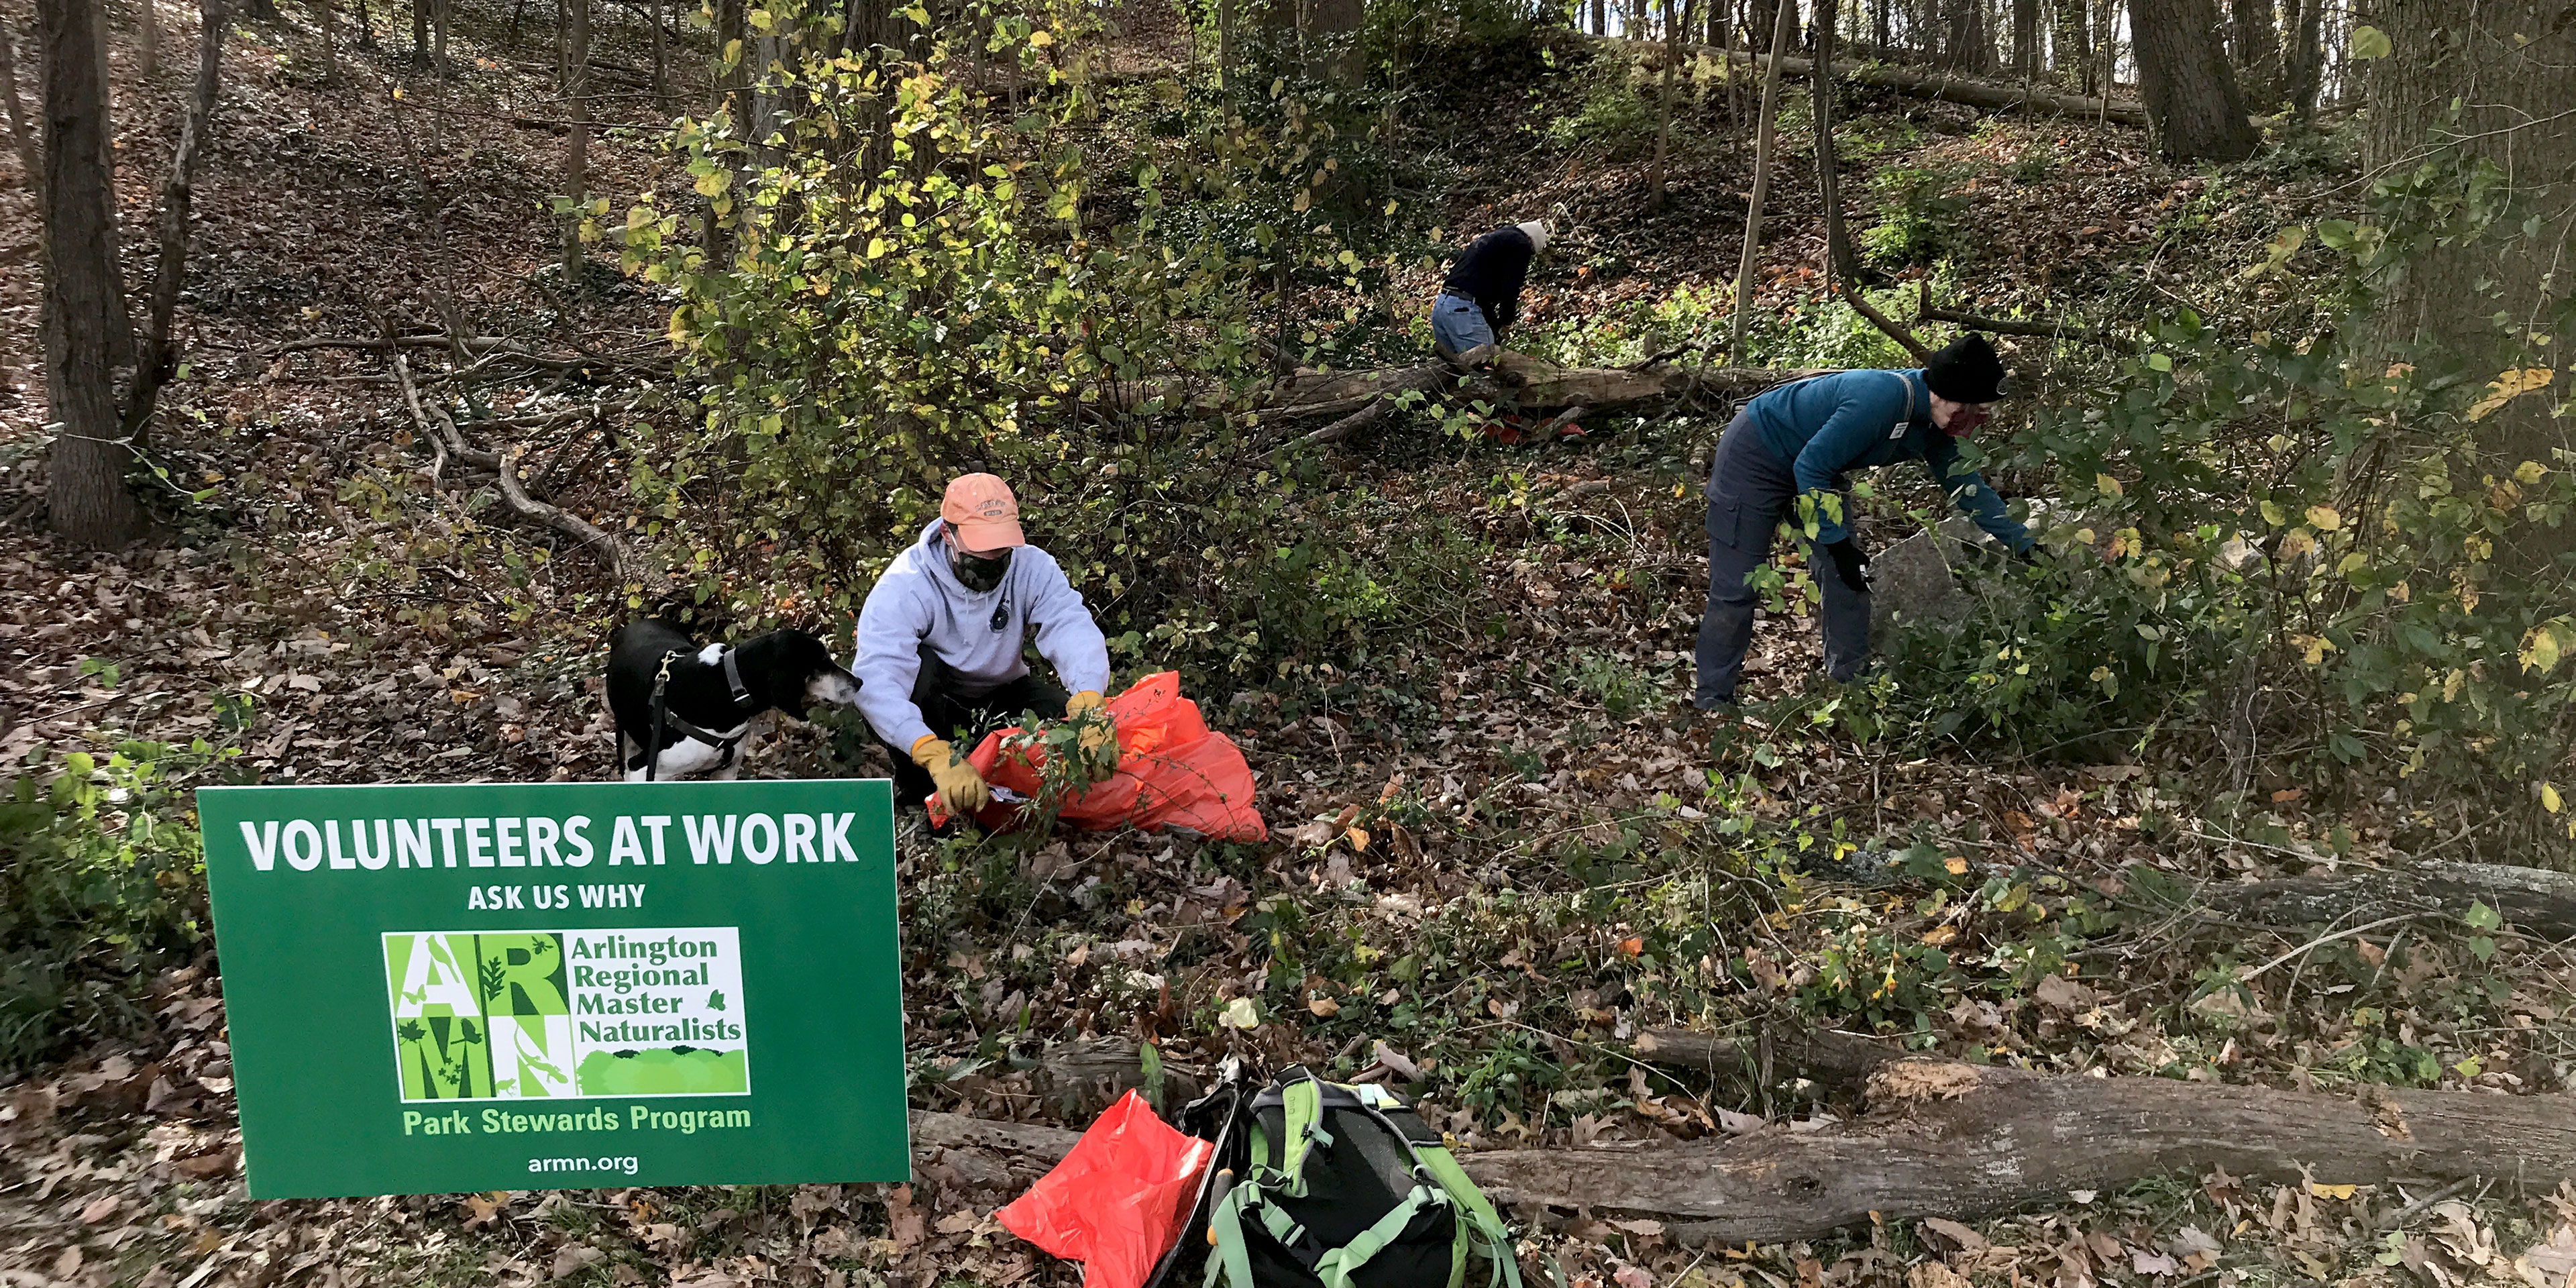 Three volunteers and a dog in a forest. A sign reads: Volunteers at work, ask us why, Arlington Regional Master Naturalists, Park Stewards Program.